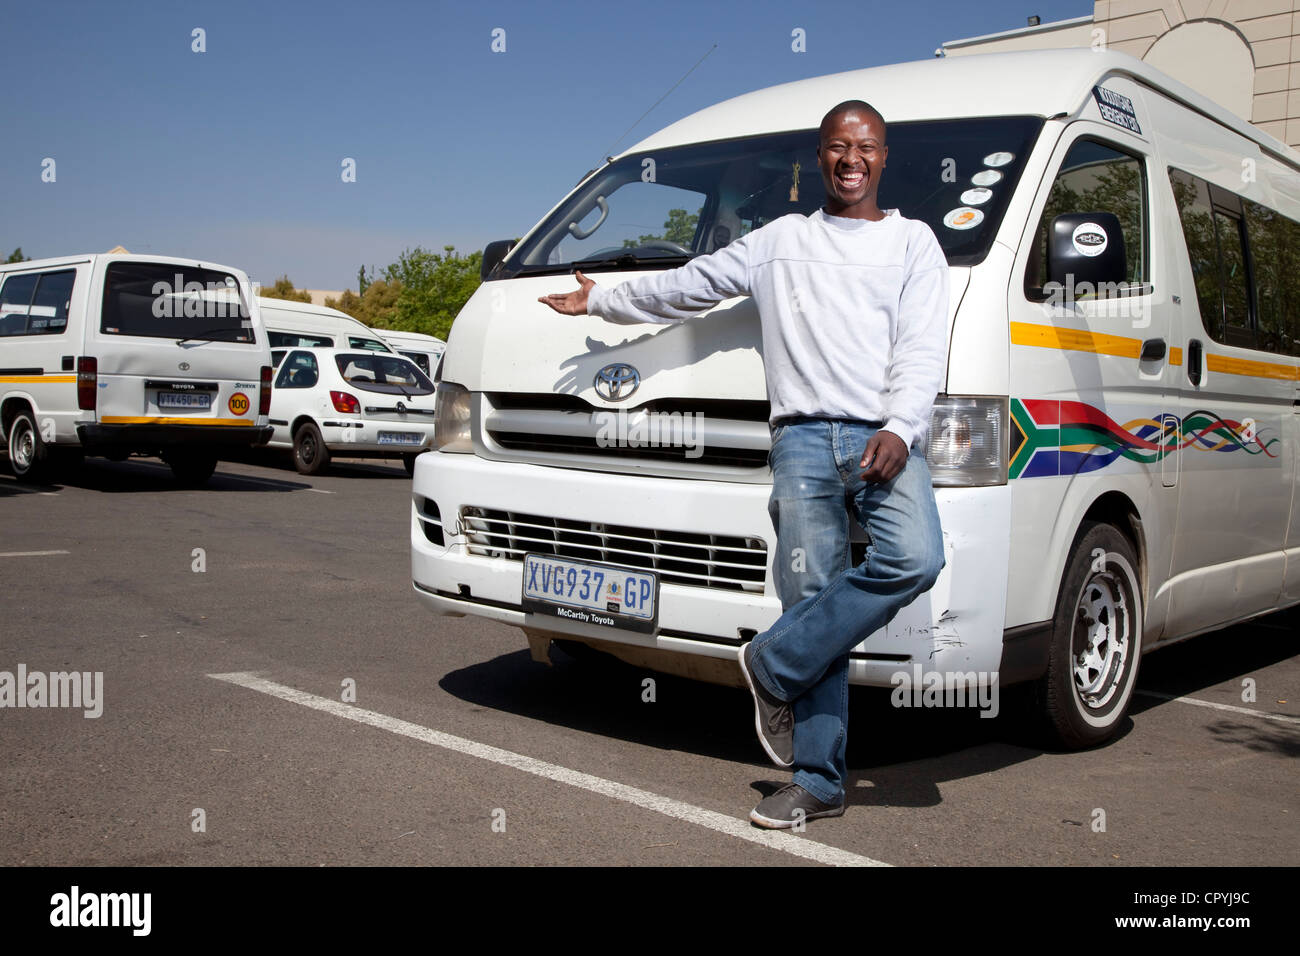 Taxi driver stands in front of his taxi, smiling at camera Stock Photo